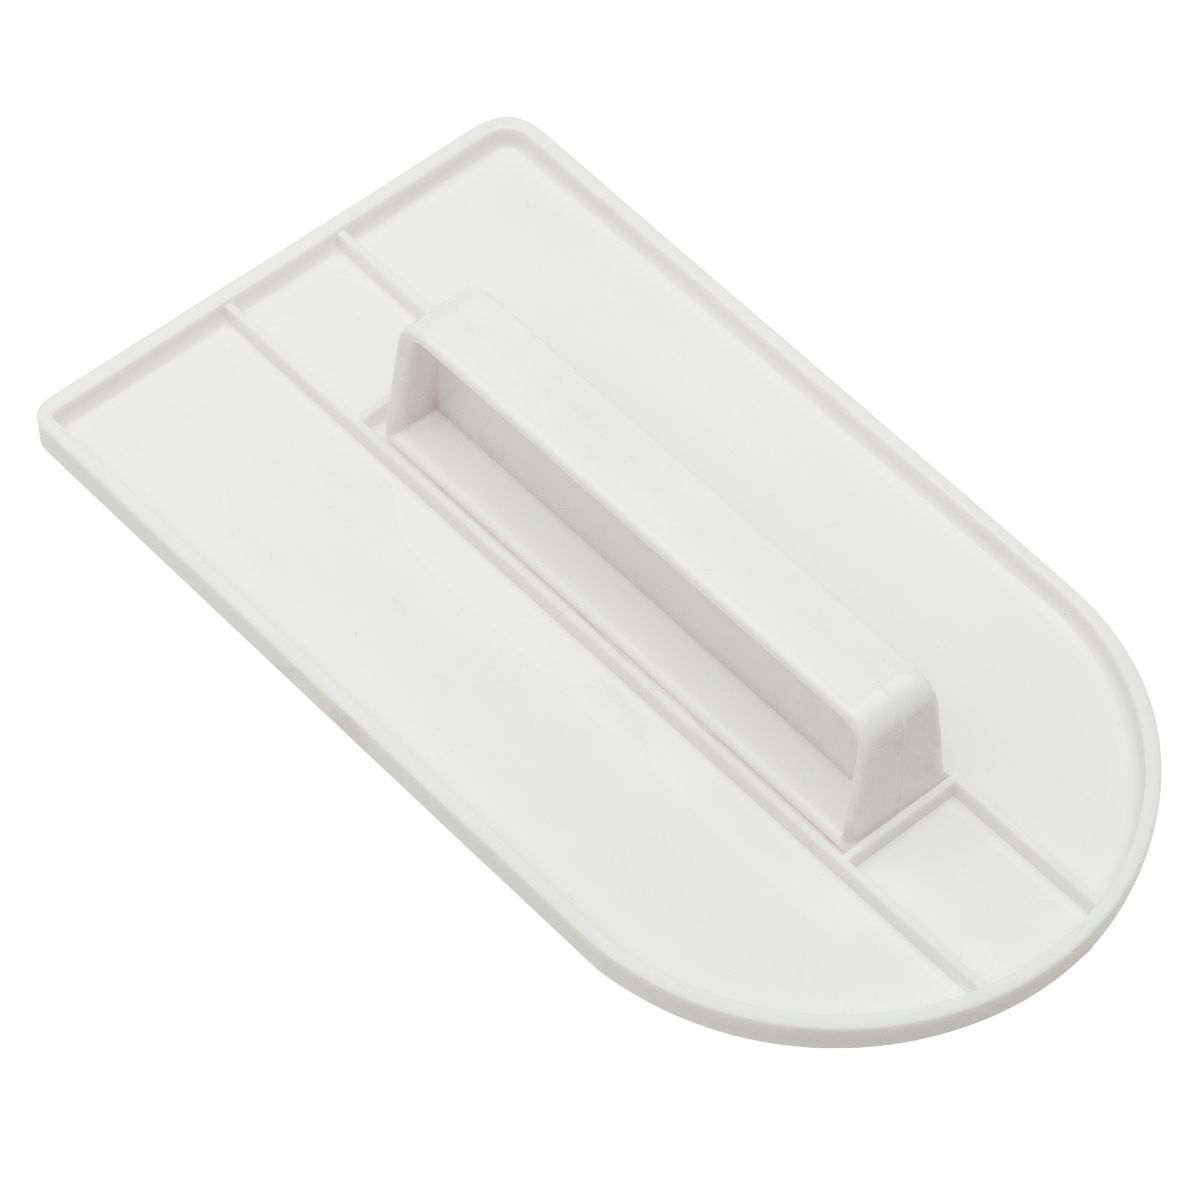 Fondant Smoother with Rounded Front Ateco Fondant Tool - Bake Supply Plus